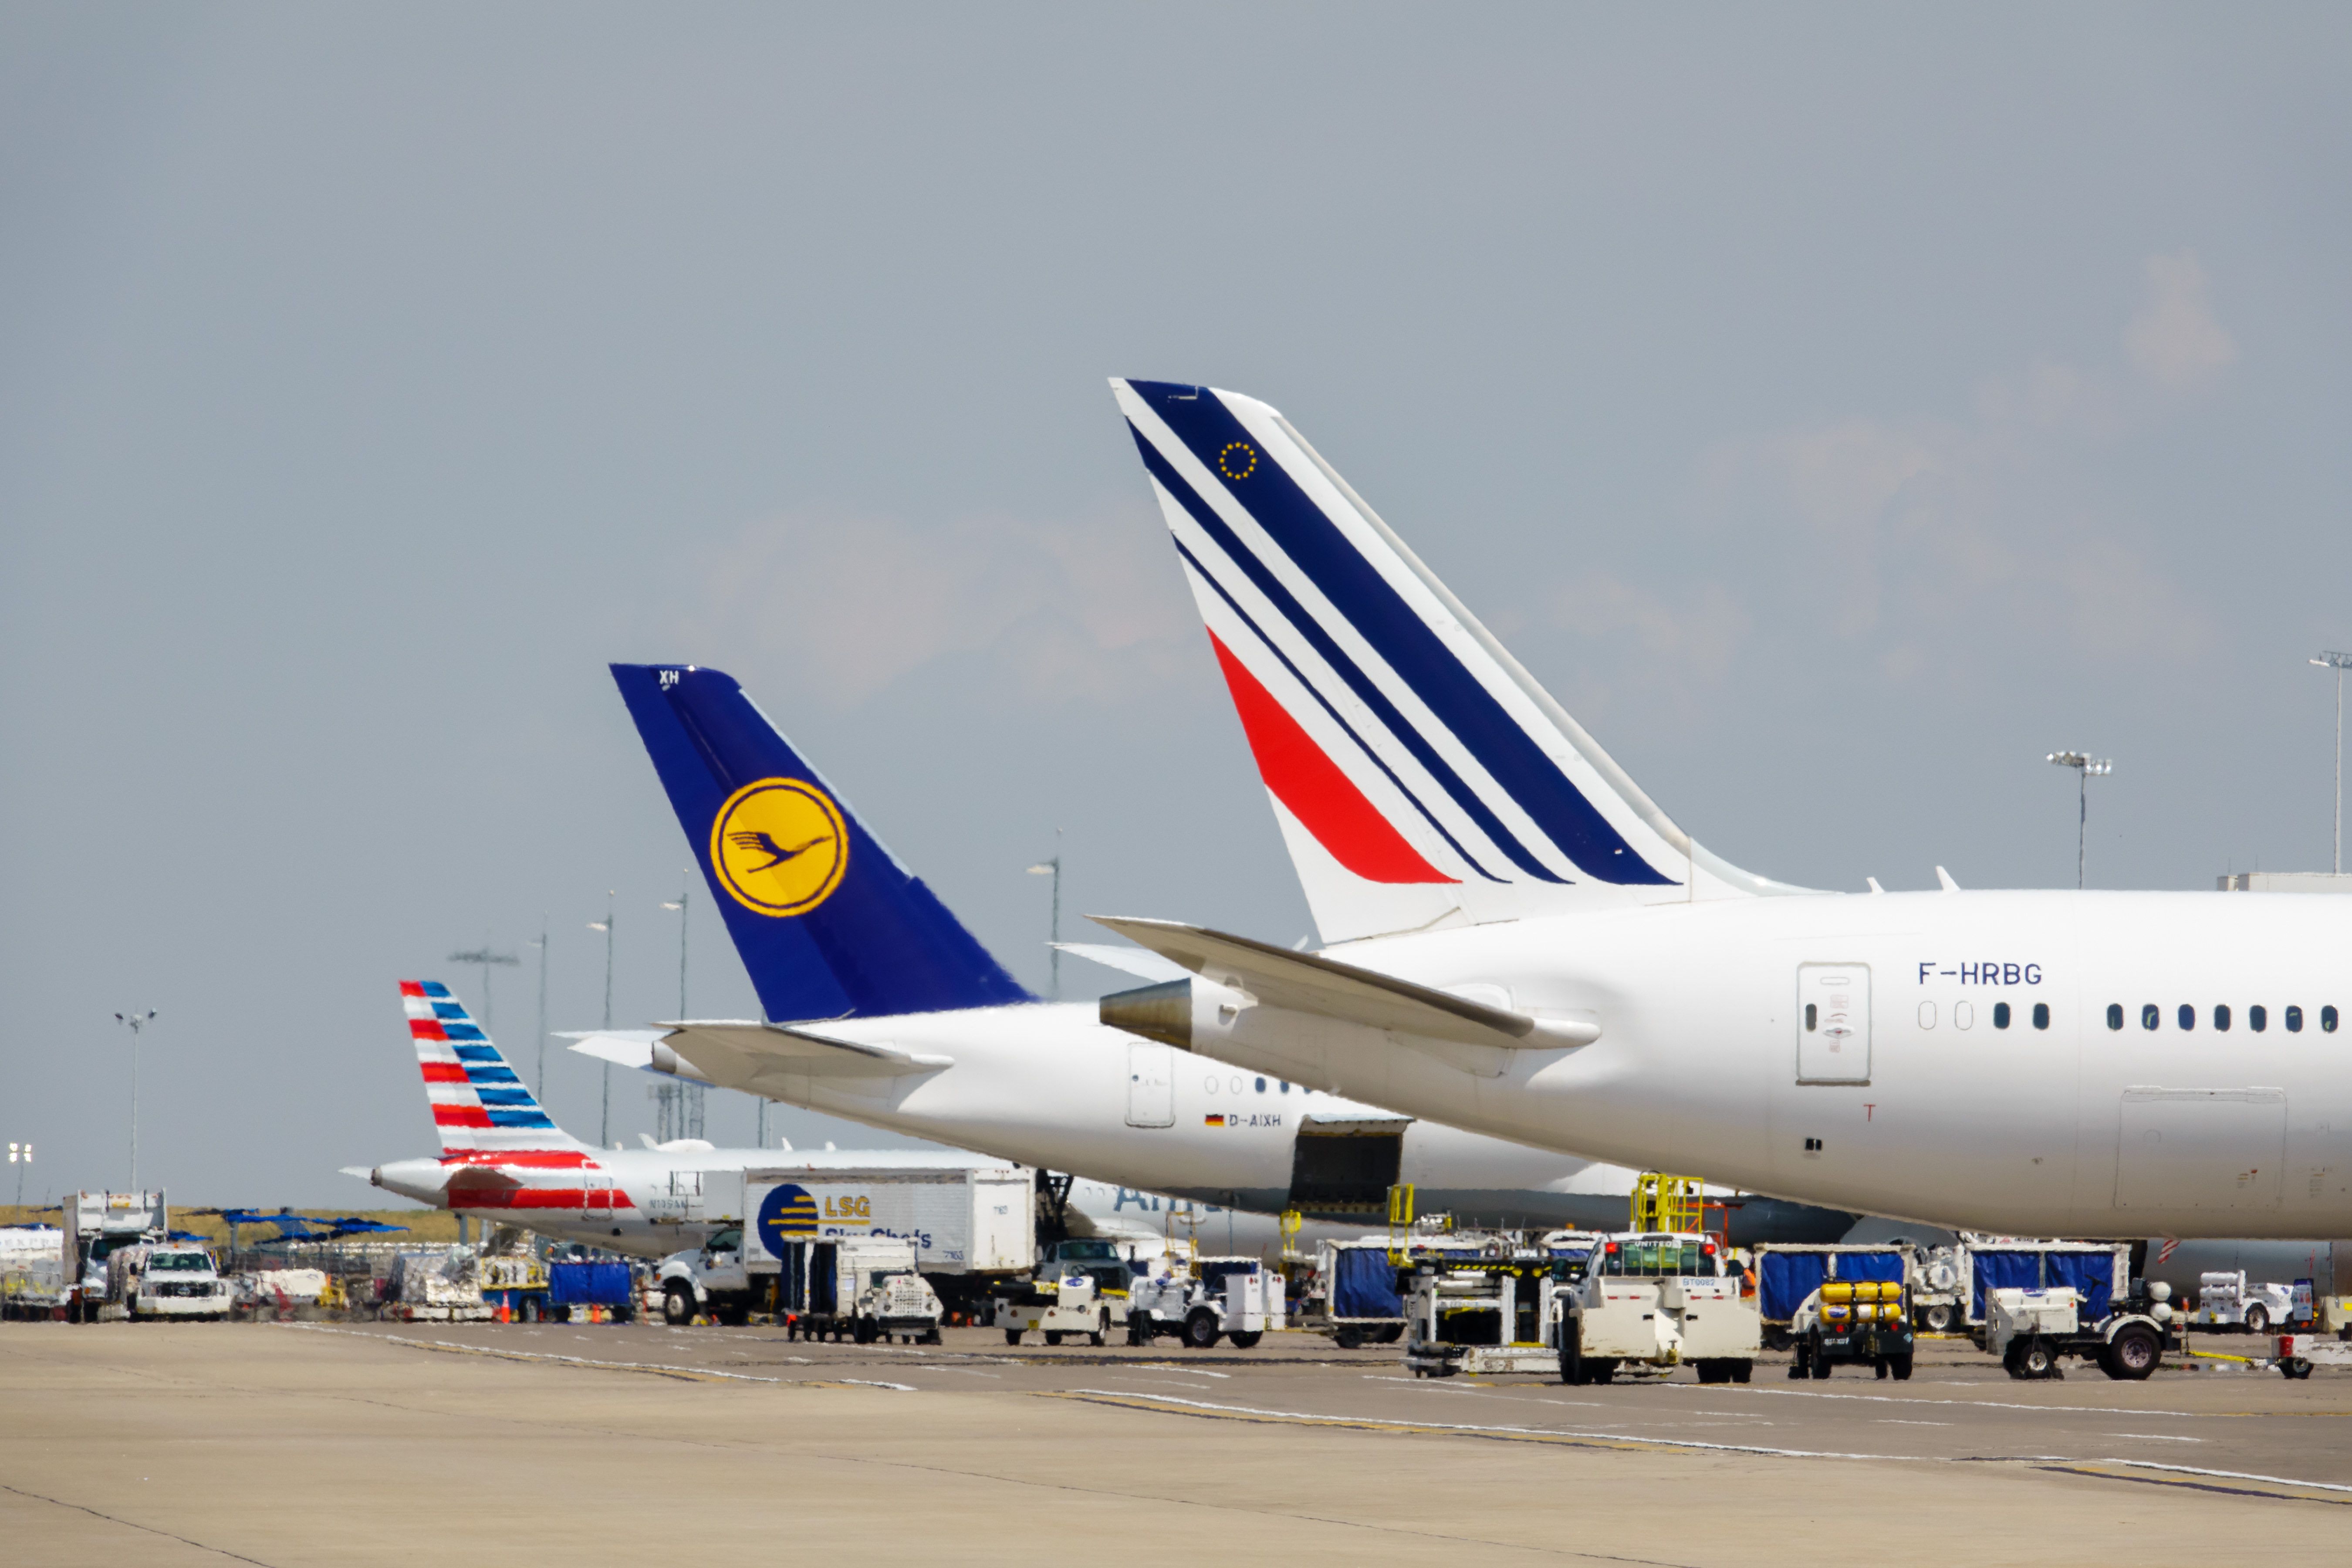 Lufthansa, American Airlines and Air France aircraft parked at Denver International Airport.